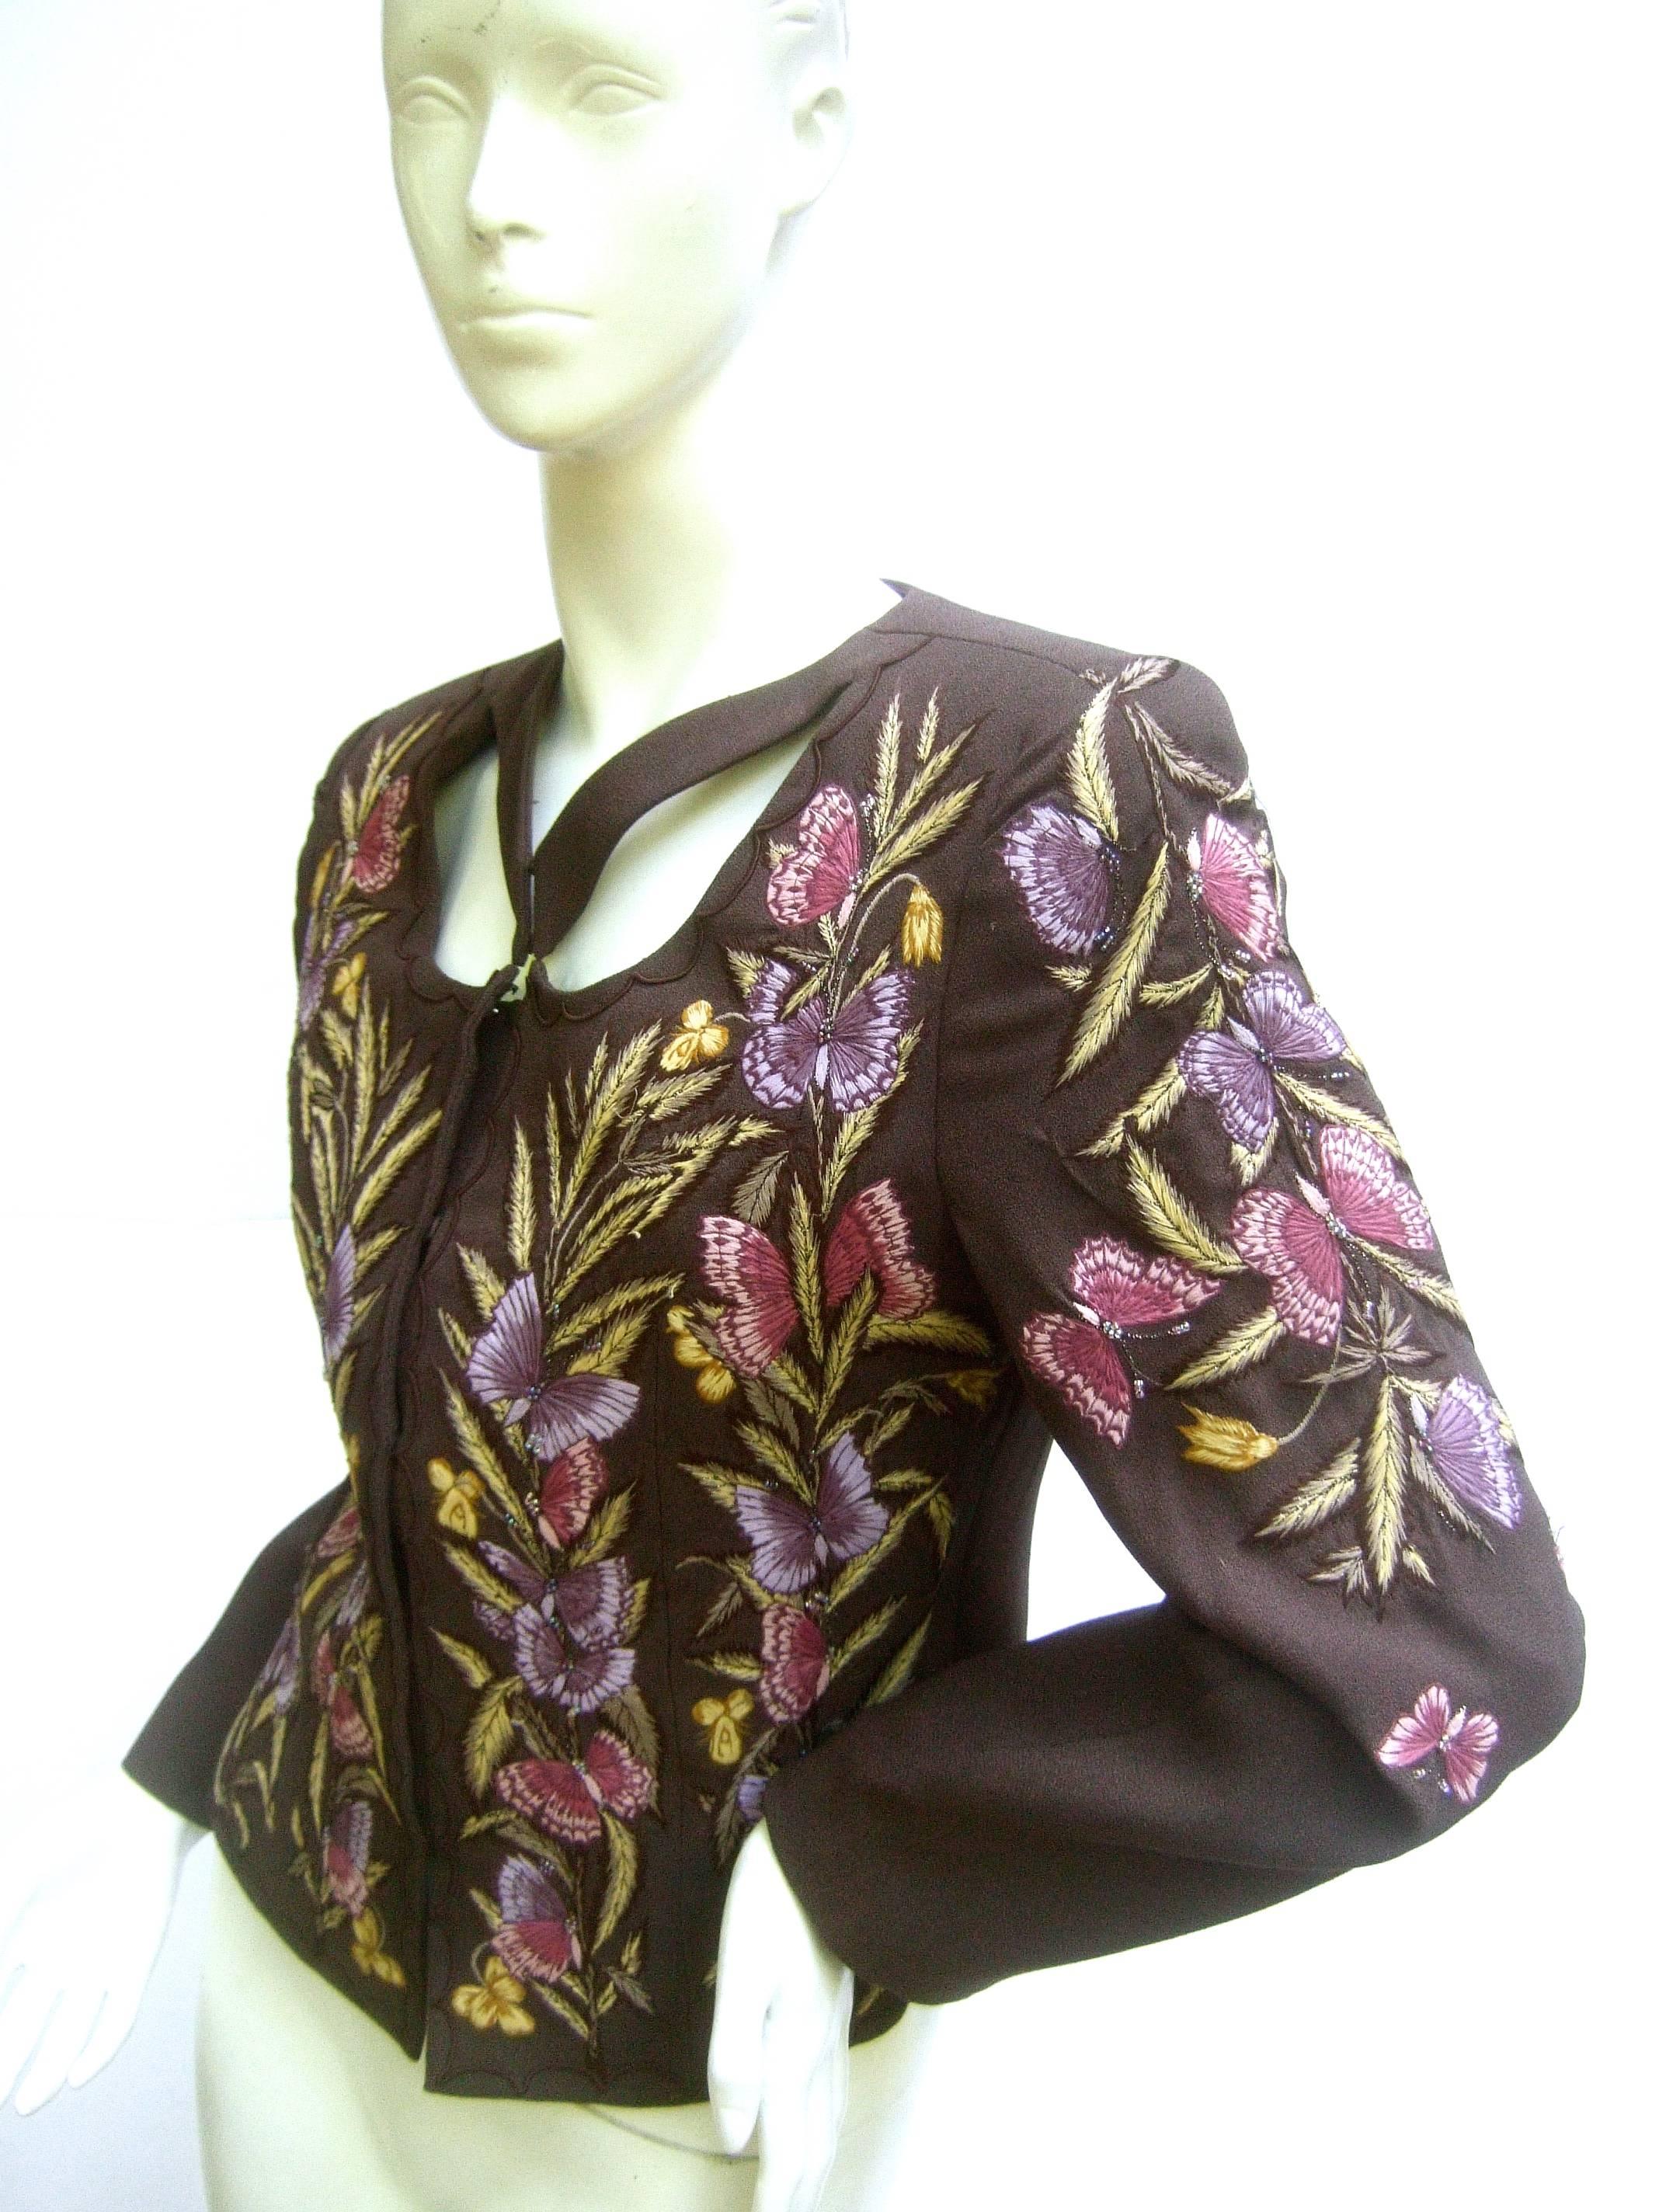 Embroidered butterfly brown wool jacket by Zelda c 1990s
The stylish jacket is embellished with a collection 
of pastel embroidered butterflies 

The series of embroidered butterflies and foliage 
run down the front and extend to the